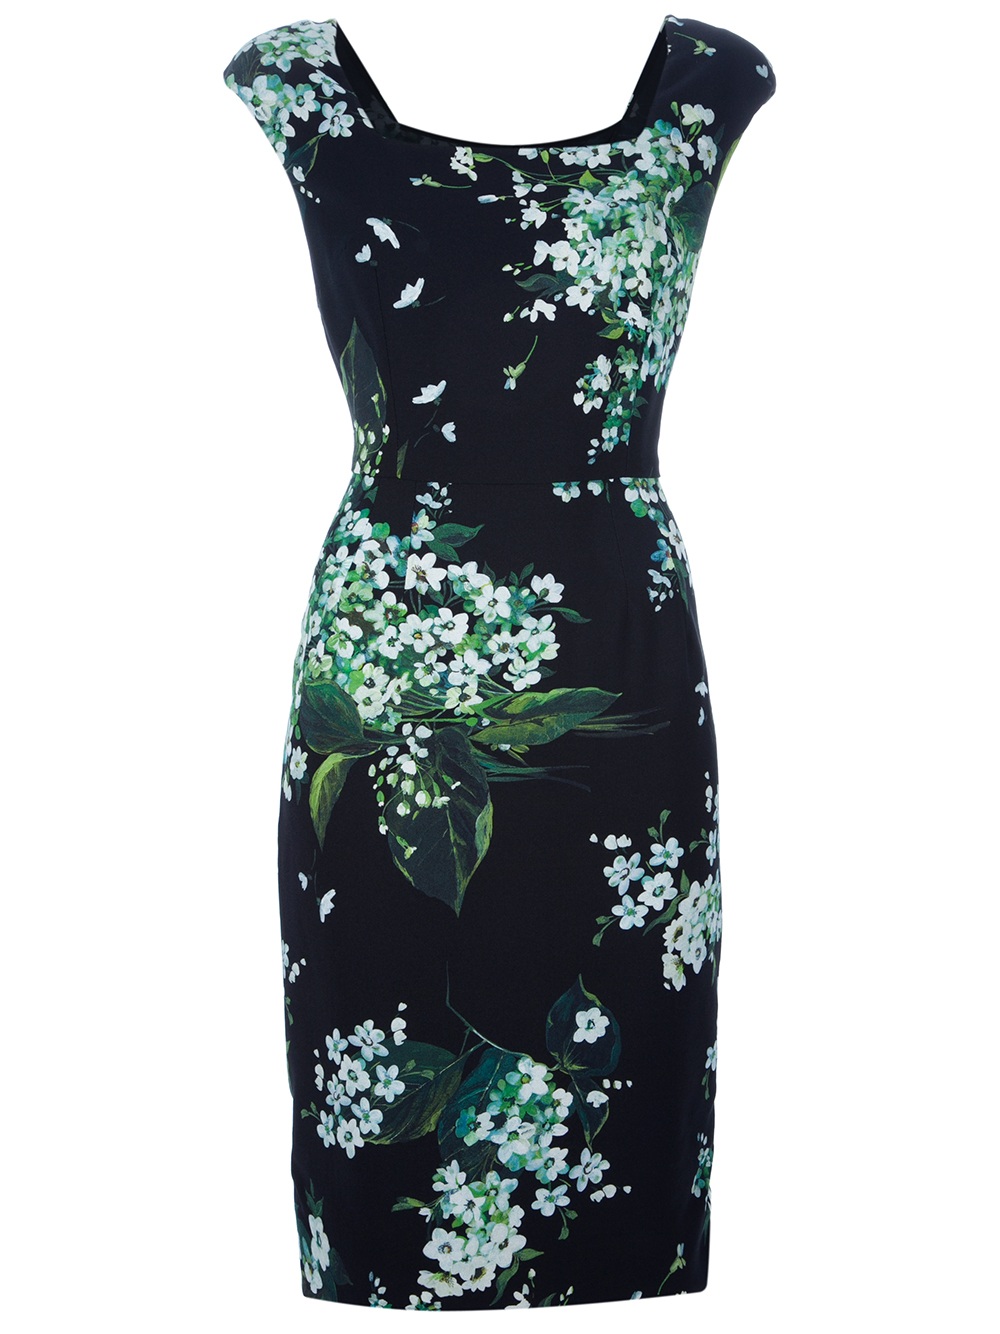 Lyst - Dolce & Gabbana Floral Fitted Dress